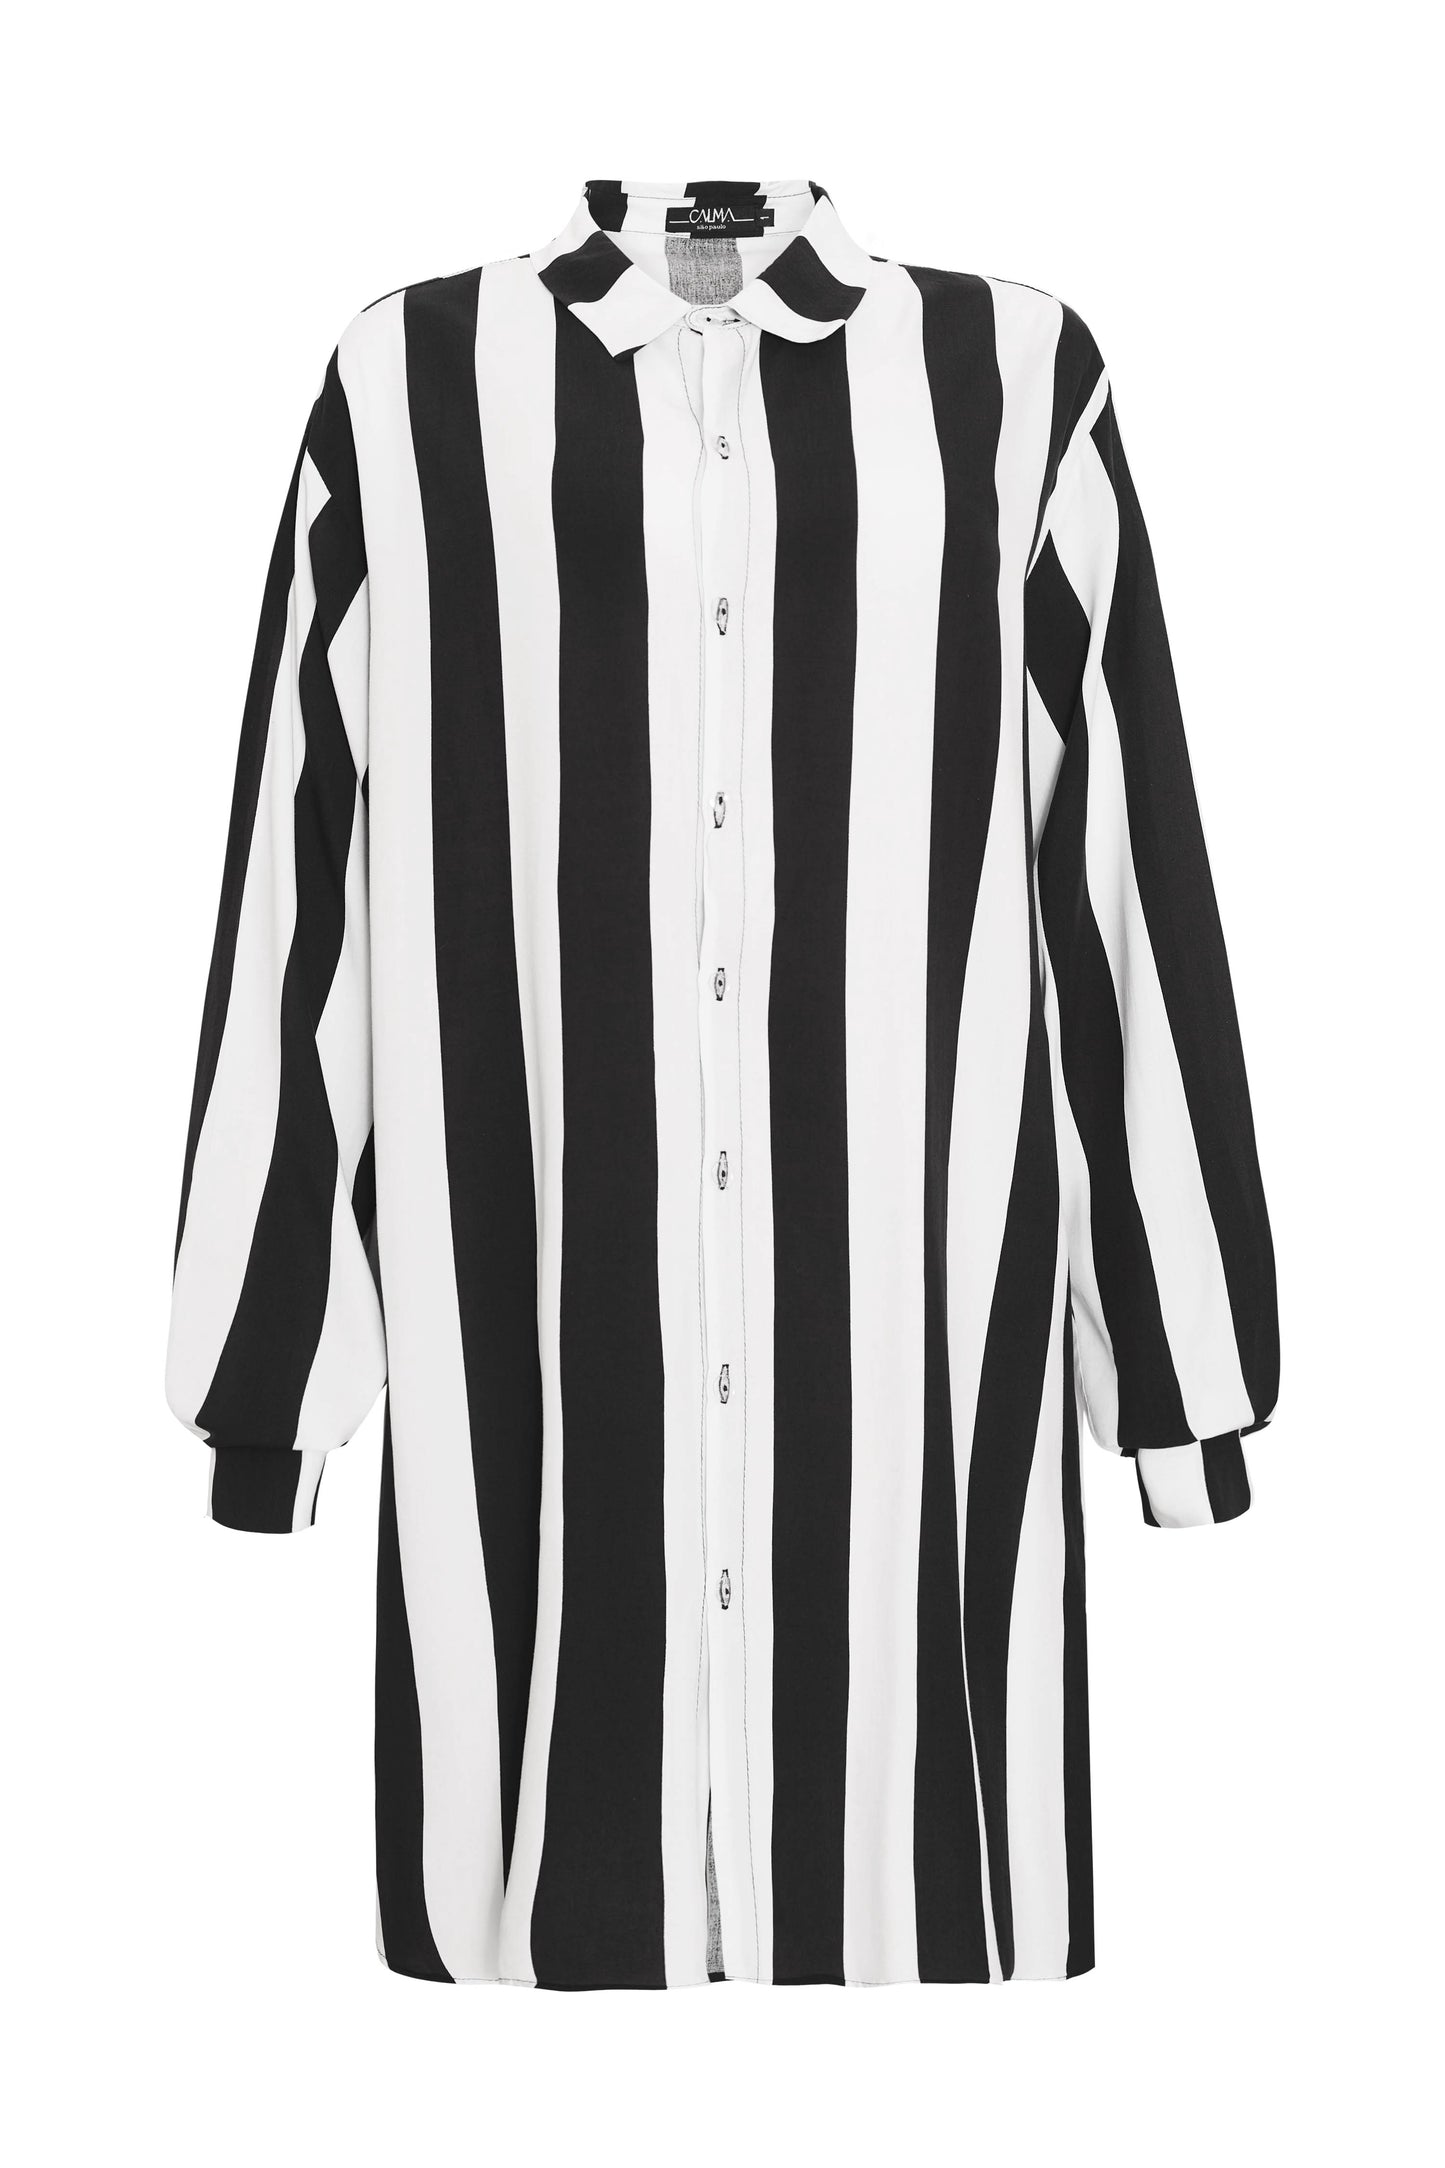 Long sleeve shirt with a stripe pattern in black and white, the fit is oversize and a bit long perfect to use as a dress or tucked in.